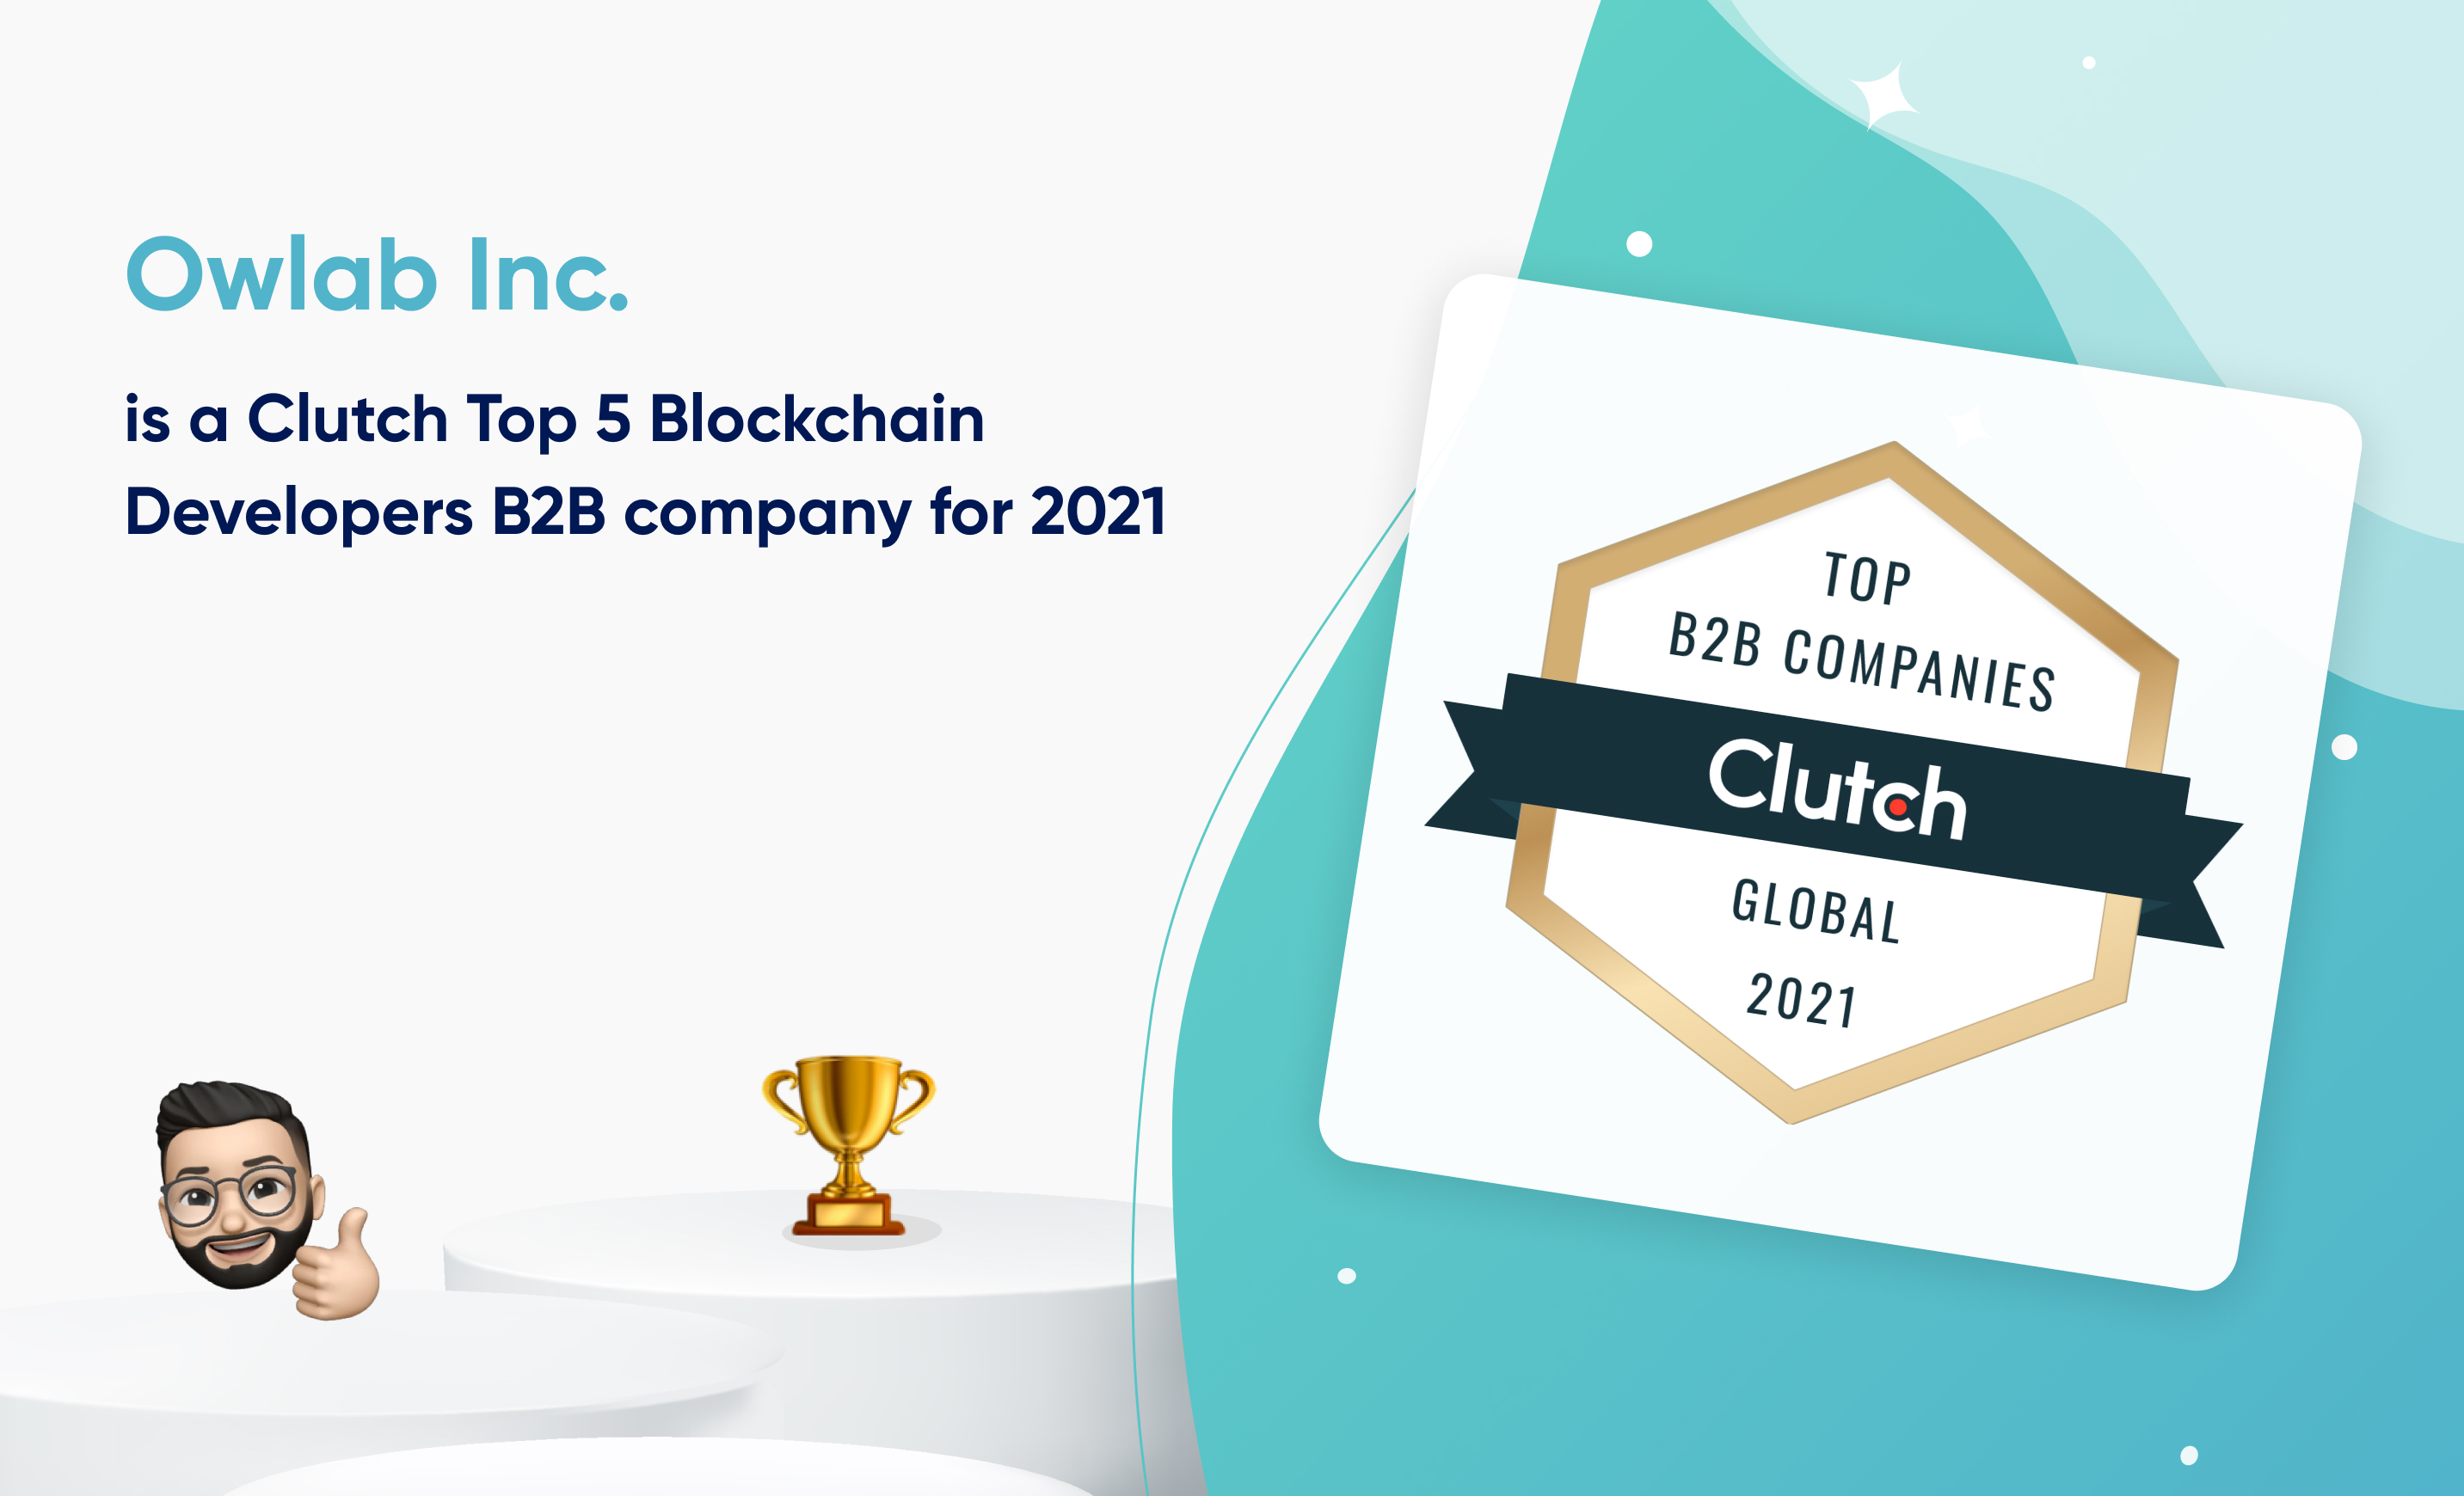 Owlab Inc. is a Clutch Global Top 5 Blockchain Developers B2B Company for 2021